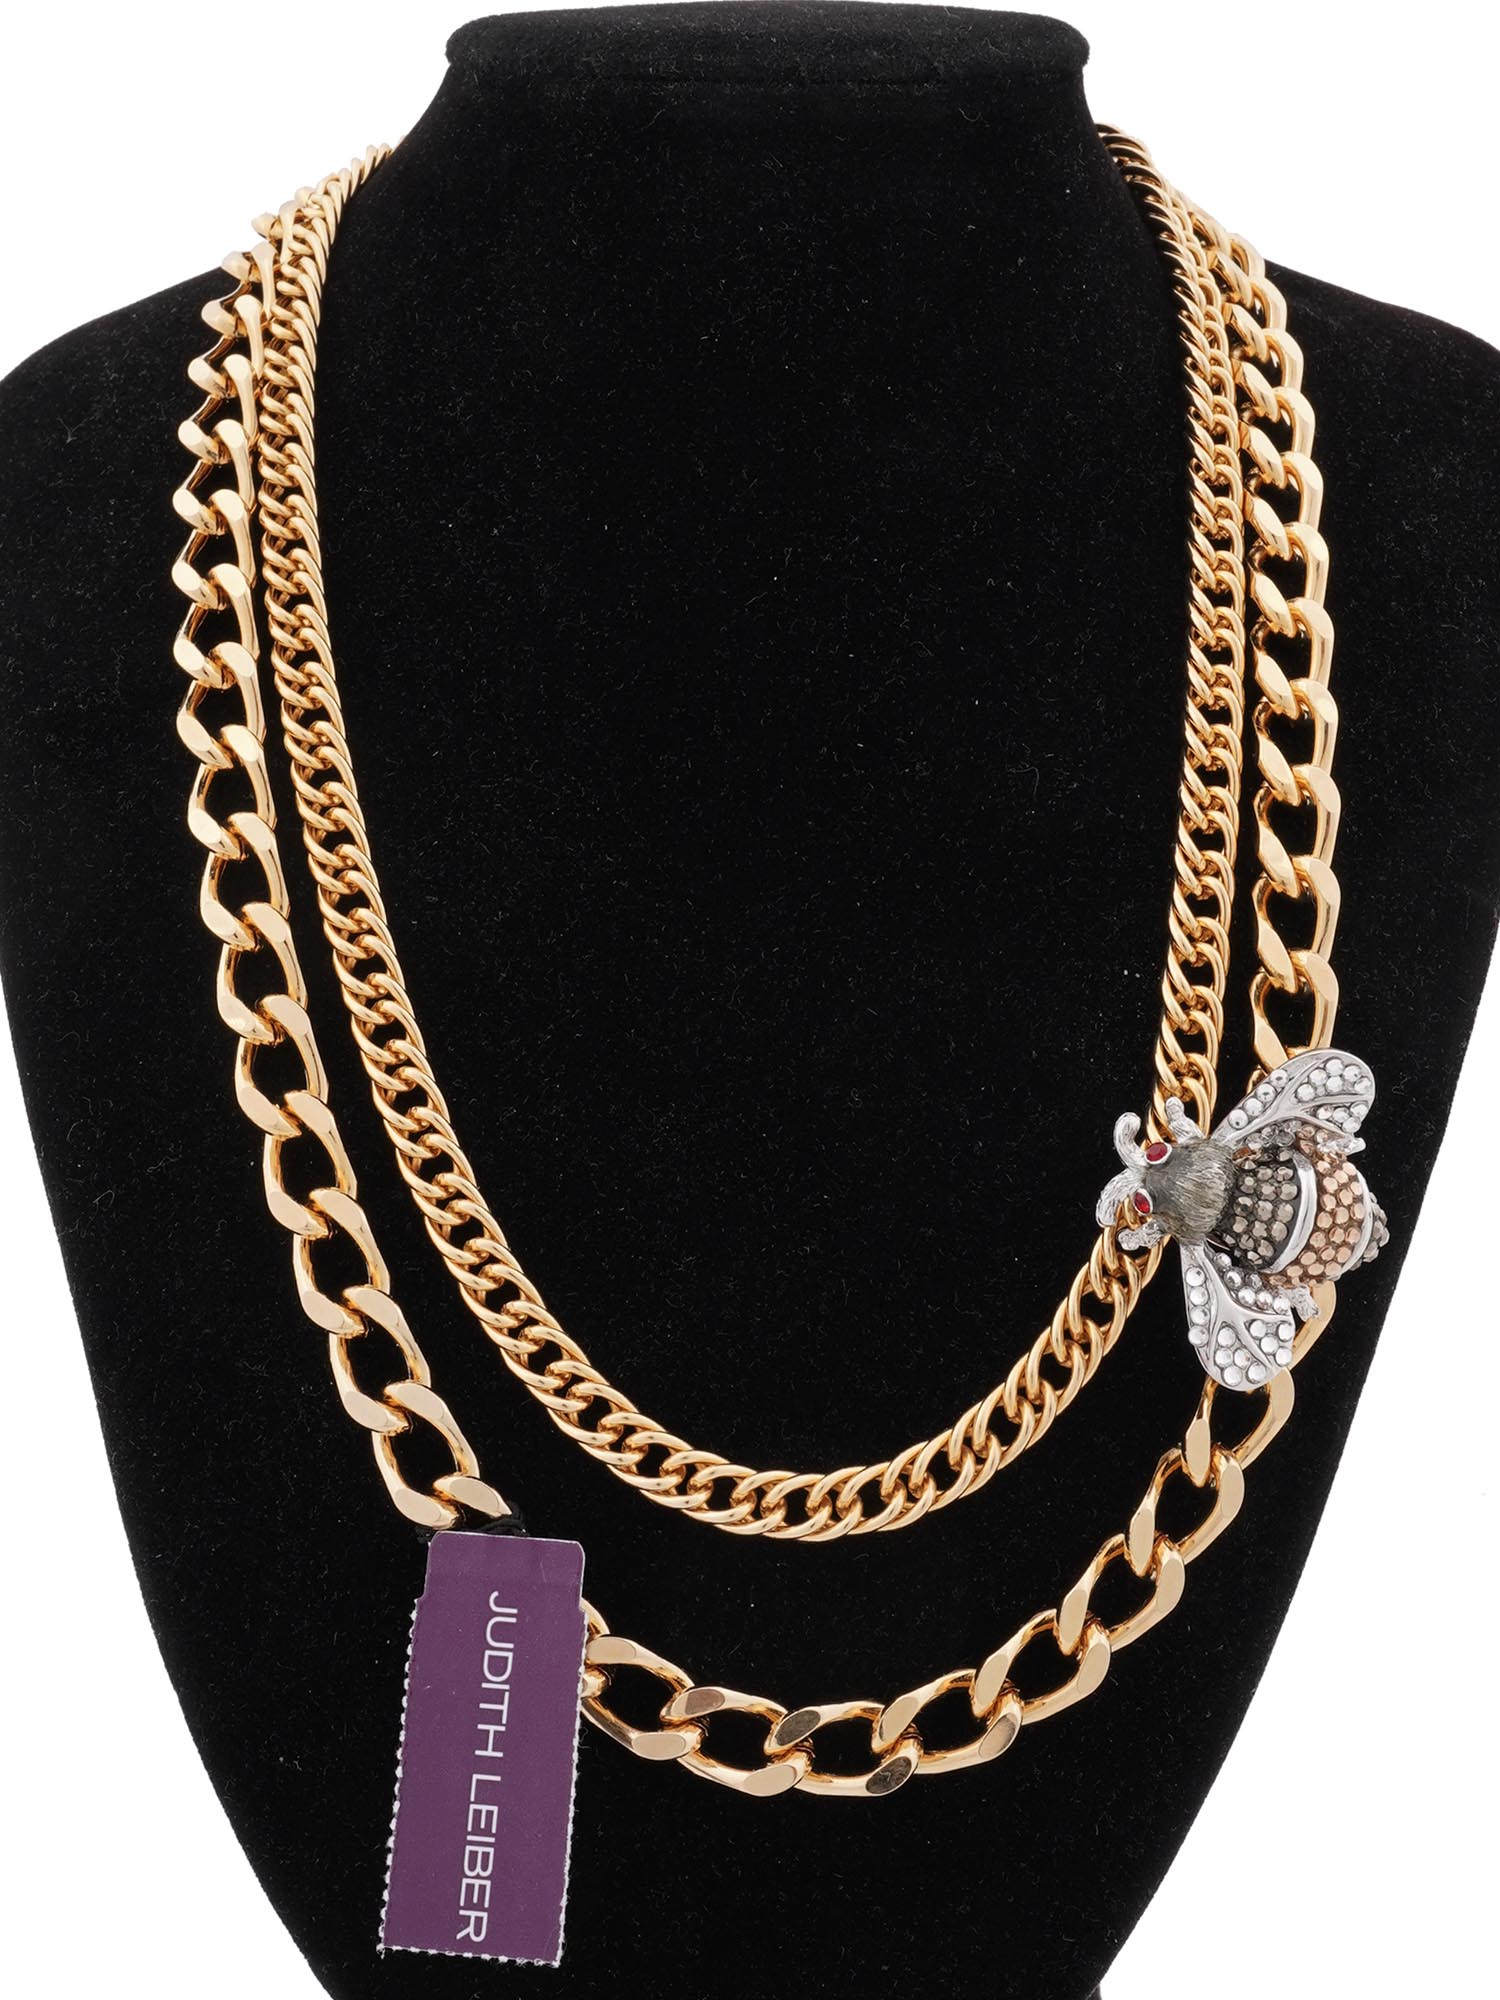 JUDITH LEIBER CHAIN NECKLACE WITH BEE PENDANT IOB PIC-1